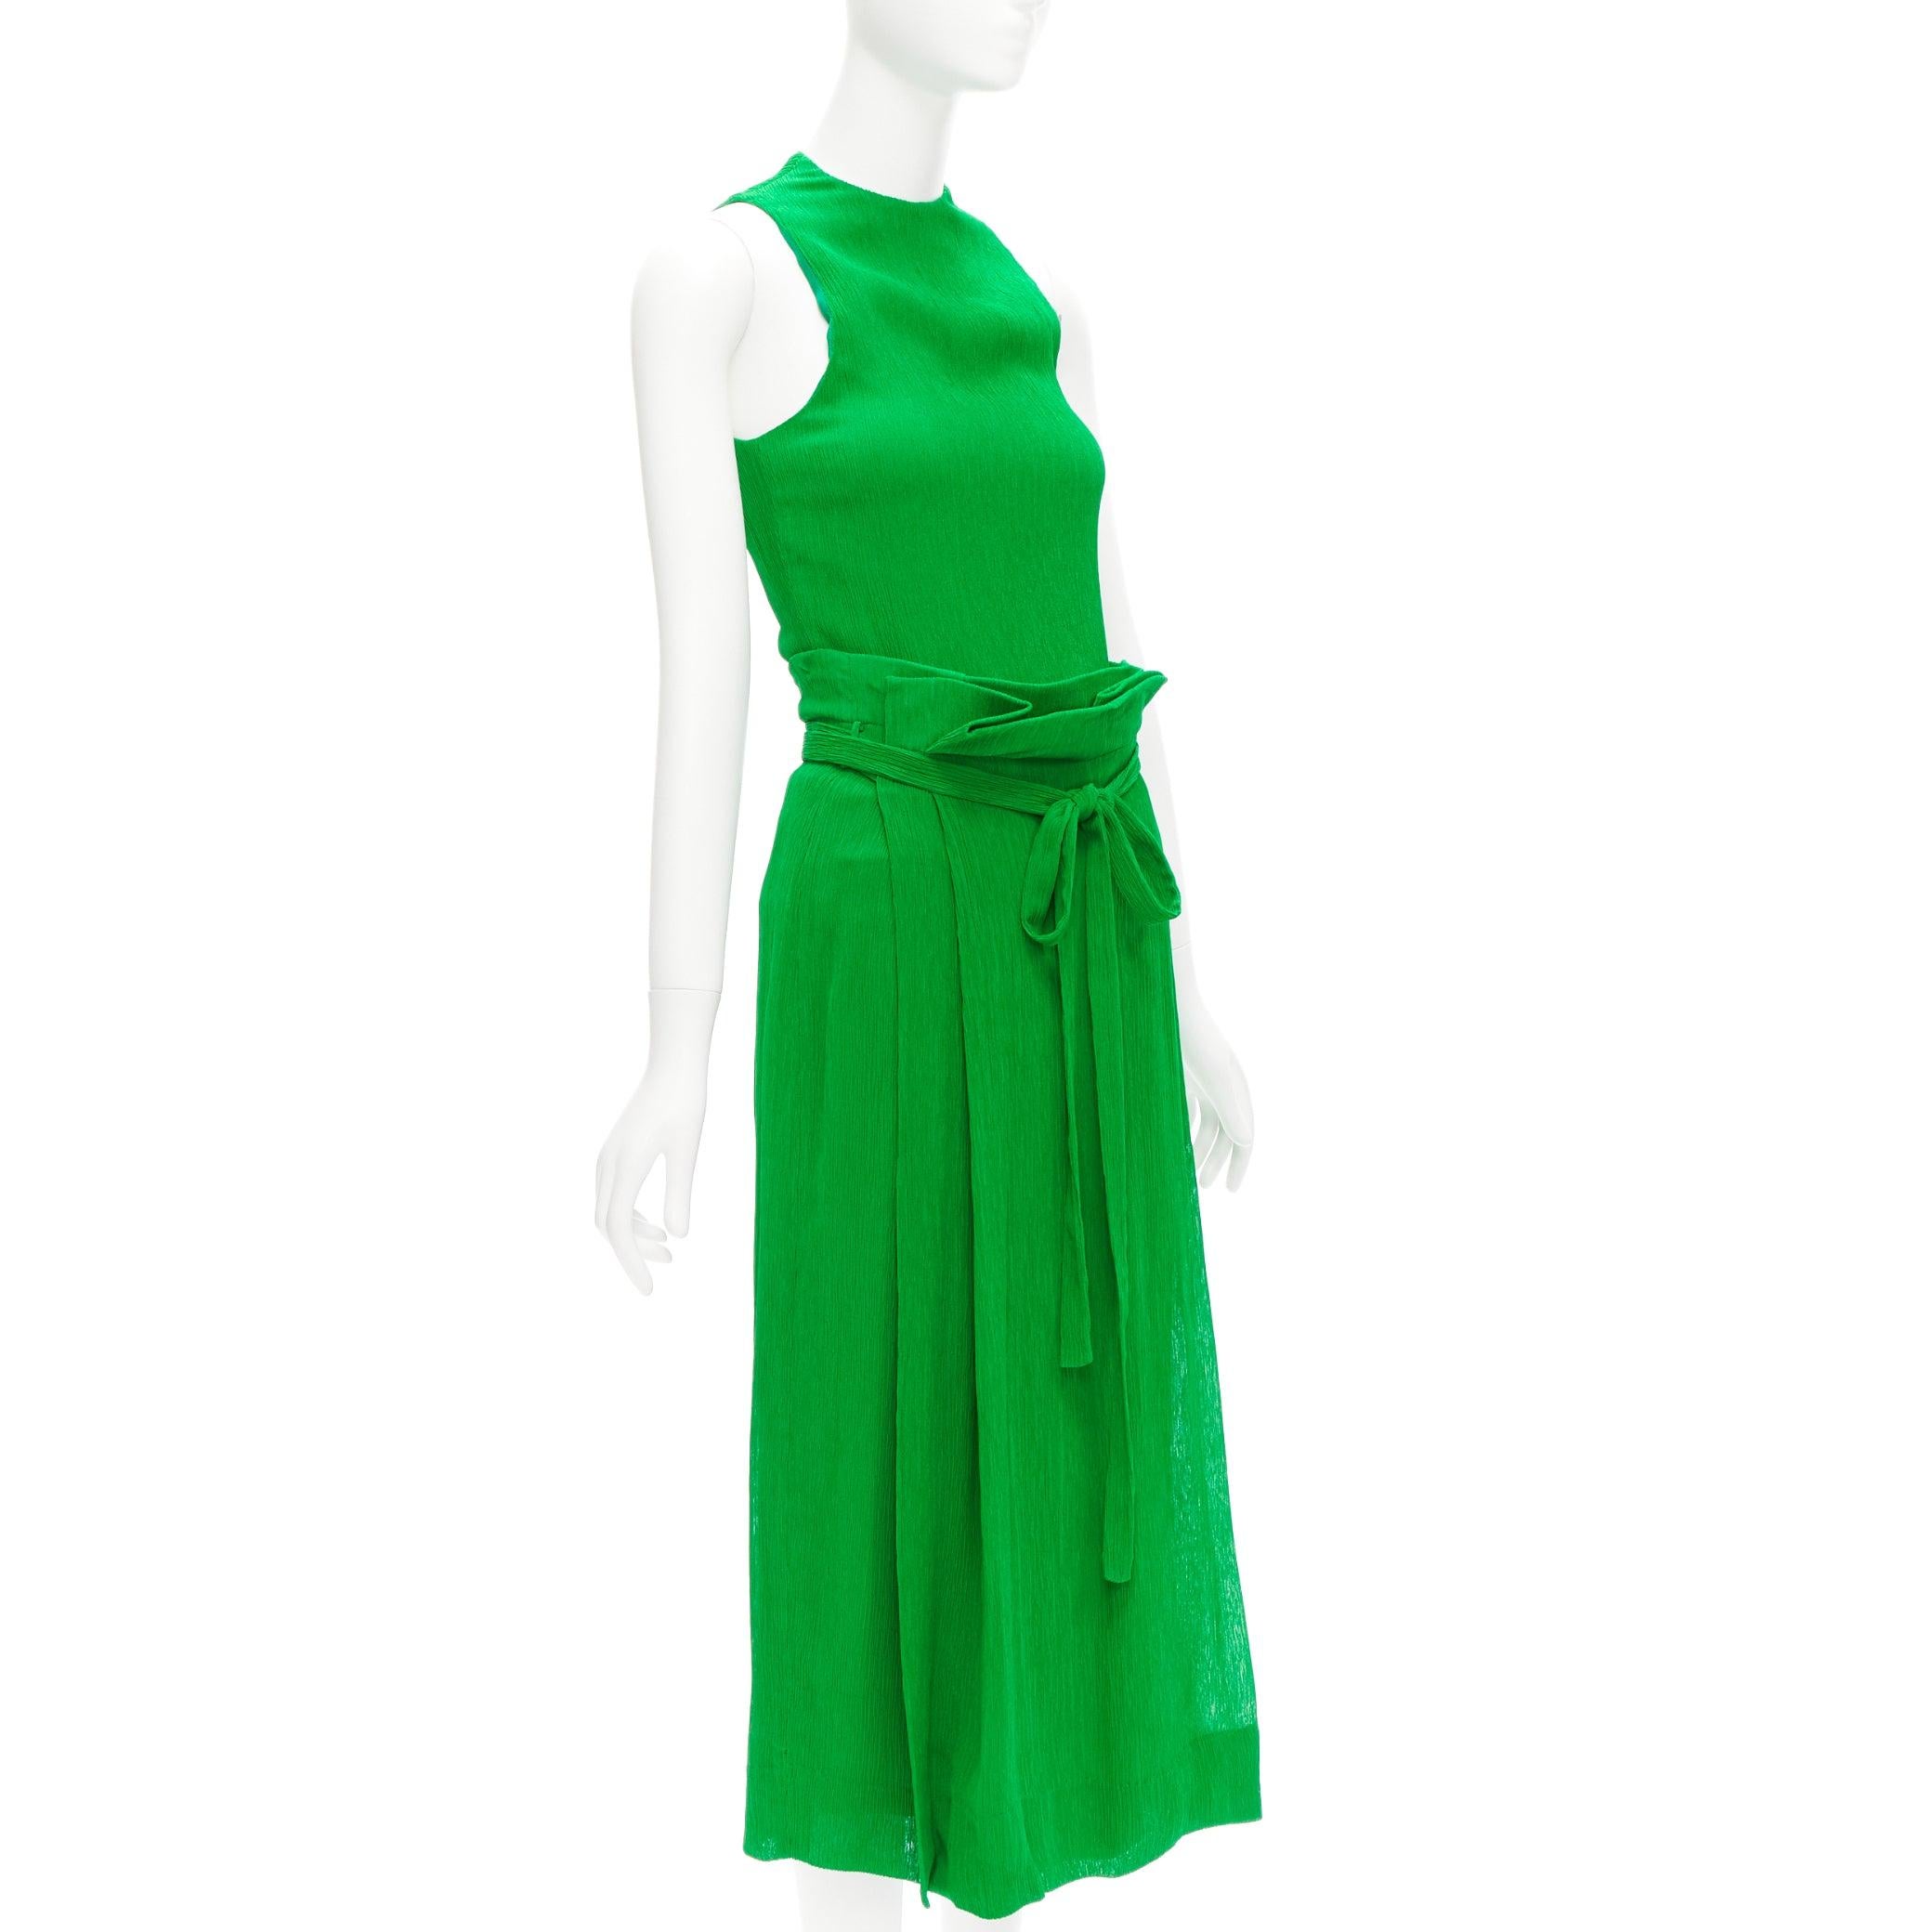 new PROTAGONIST kelly green plisse silk lined tie belt wrap skirt set US0 XS
Reference: CELG/A00393
Brand: Protagonist
Material: Viscose
Color: Green
Pattern: Solid
Closure: Self Tie
Lining: Green Silk
Extra Details: Wrap tie skirt and back zip